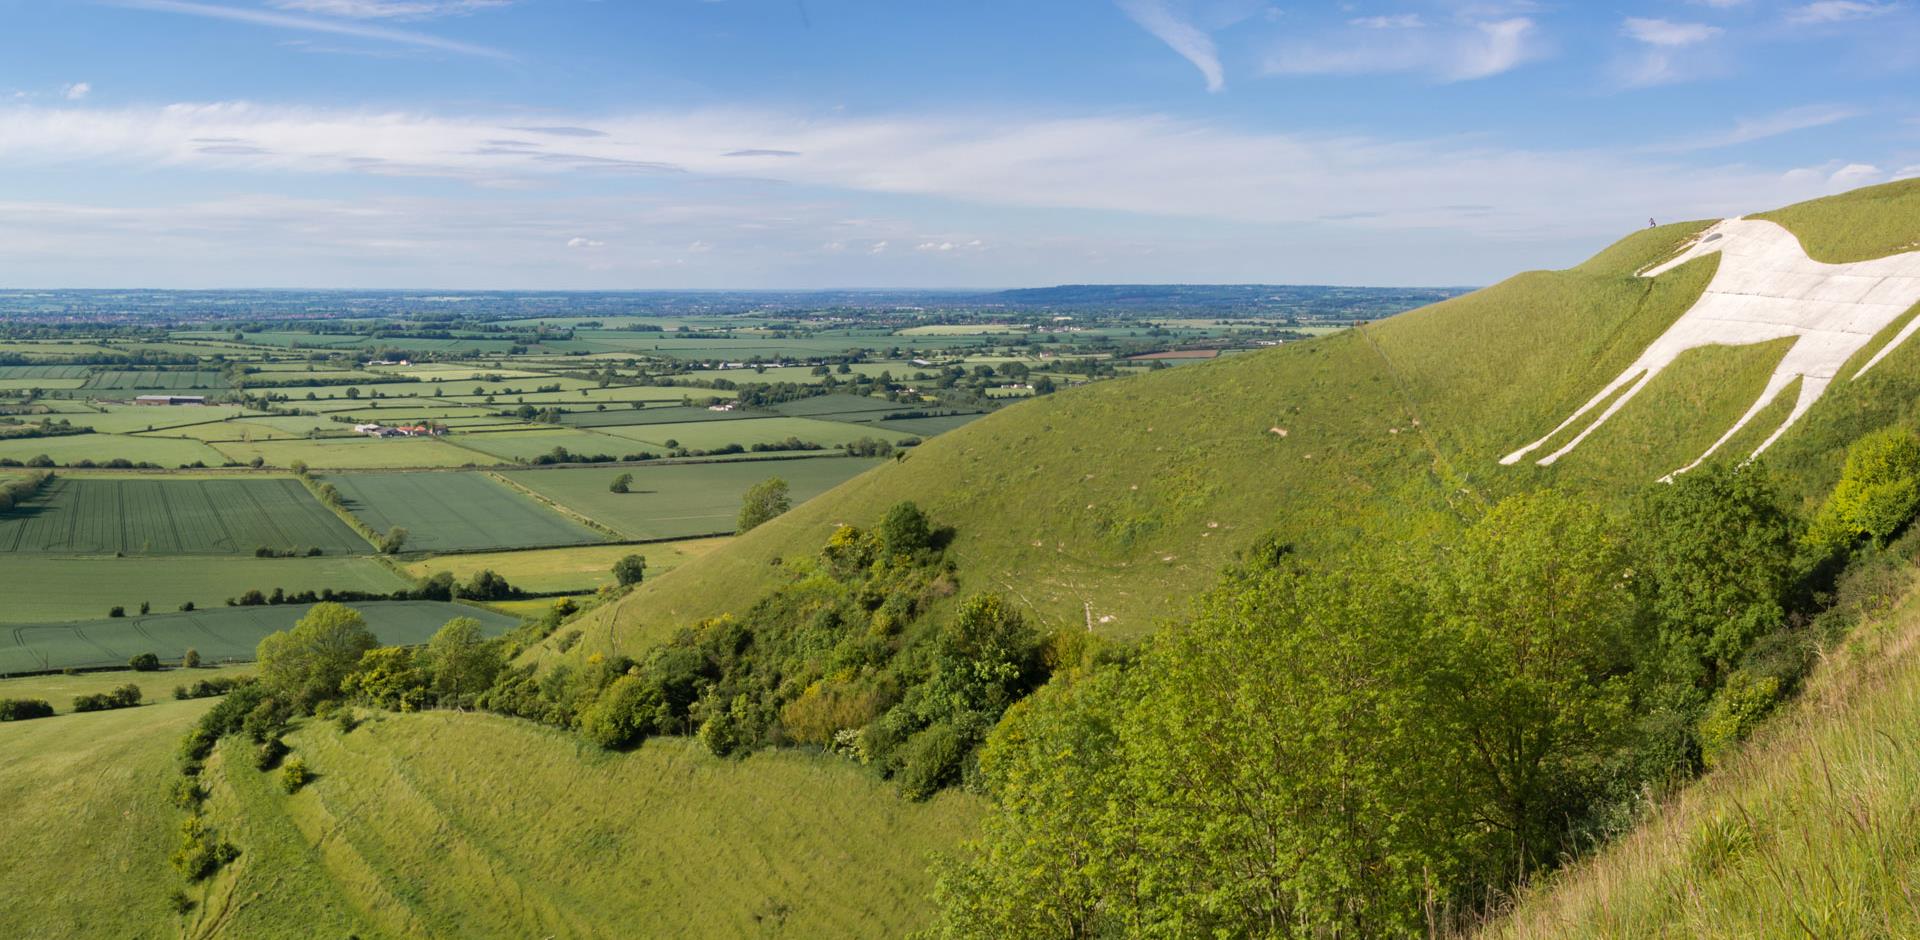 Views over the Wiltshire countryside